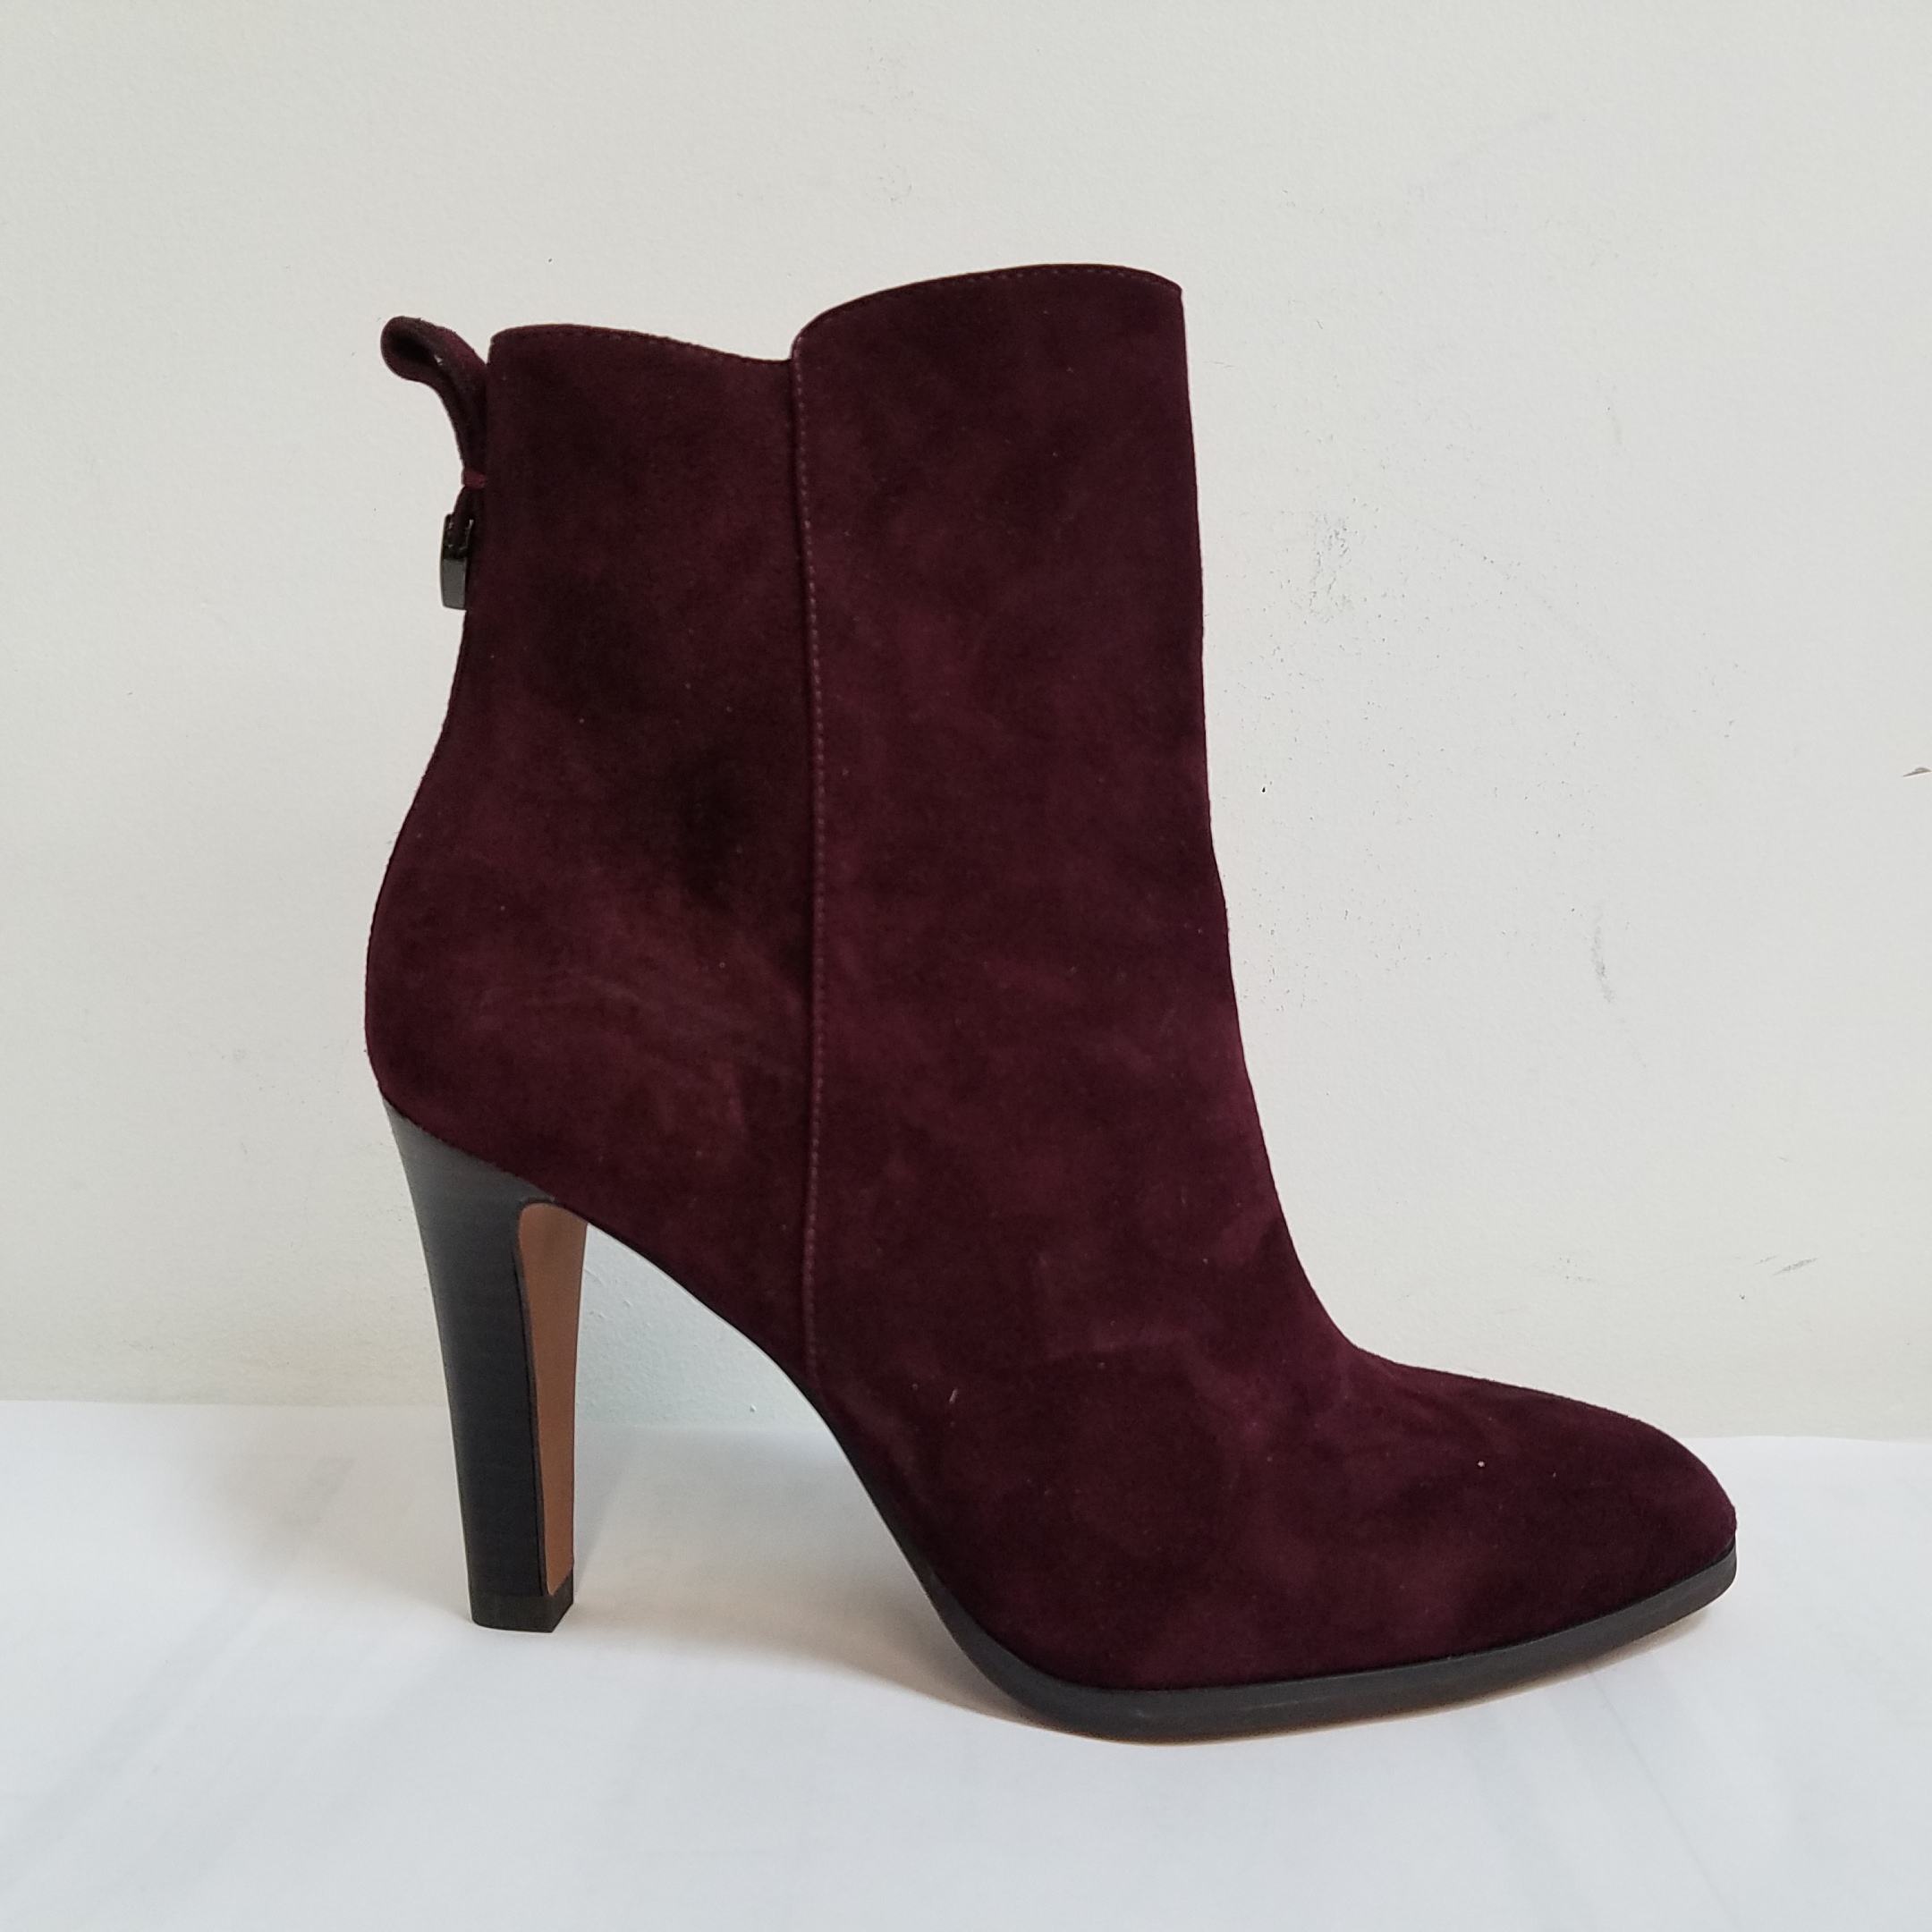 Buy the Coach Jemma Ankle Boot Ox Blood Suede Boot Stacked Heel Side ...